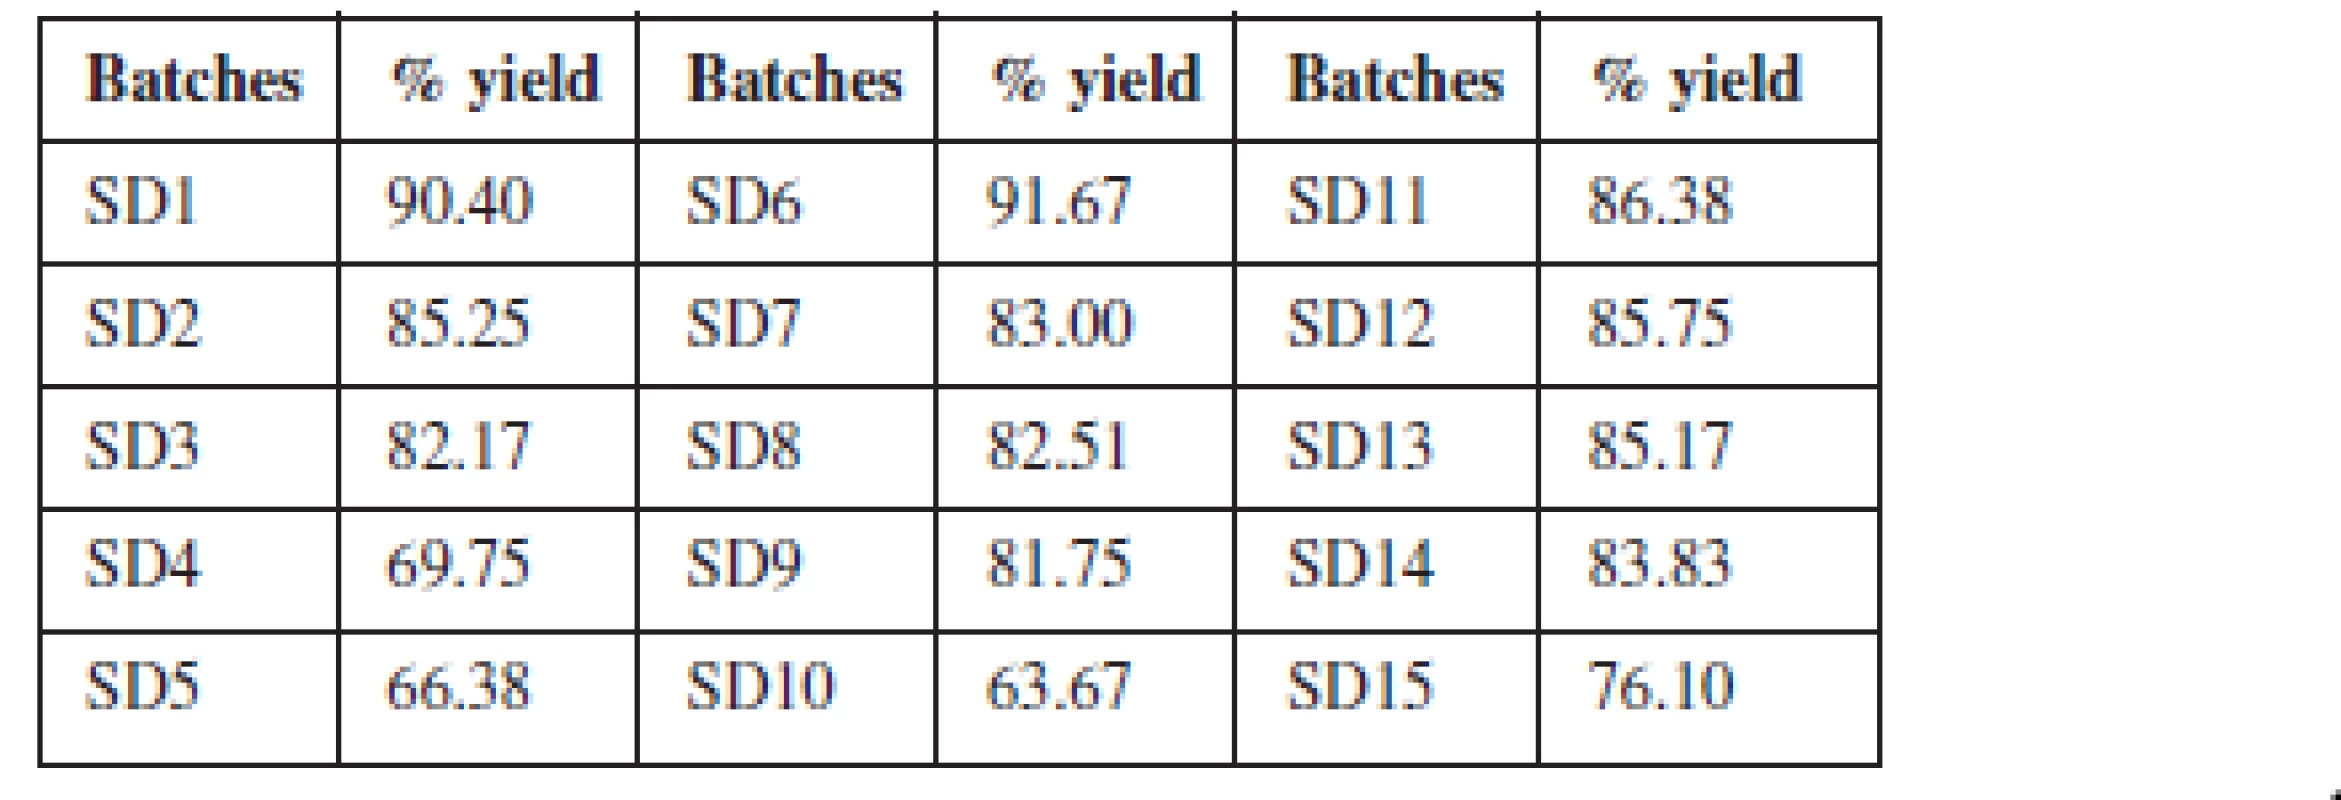 Percentage yield of solid dispersions